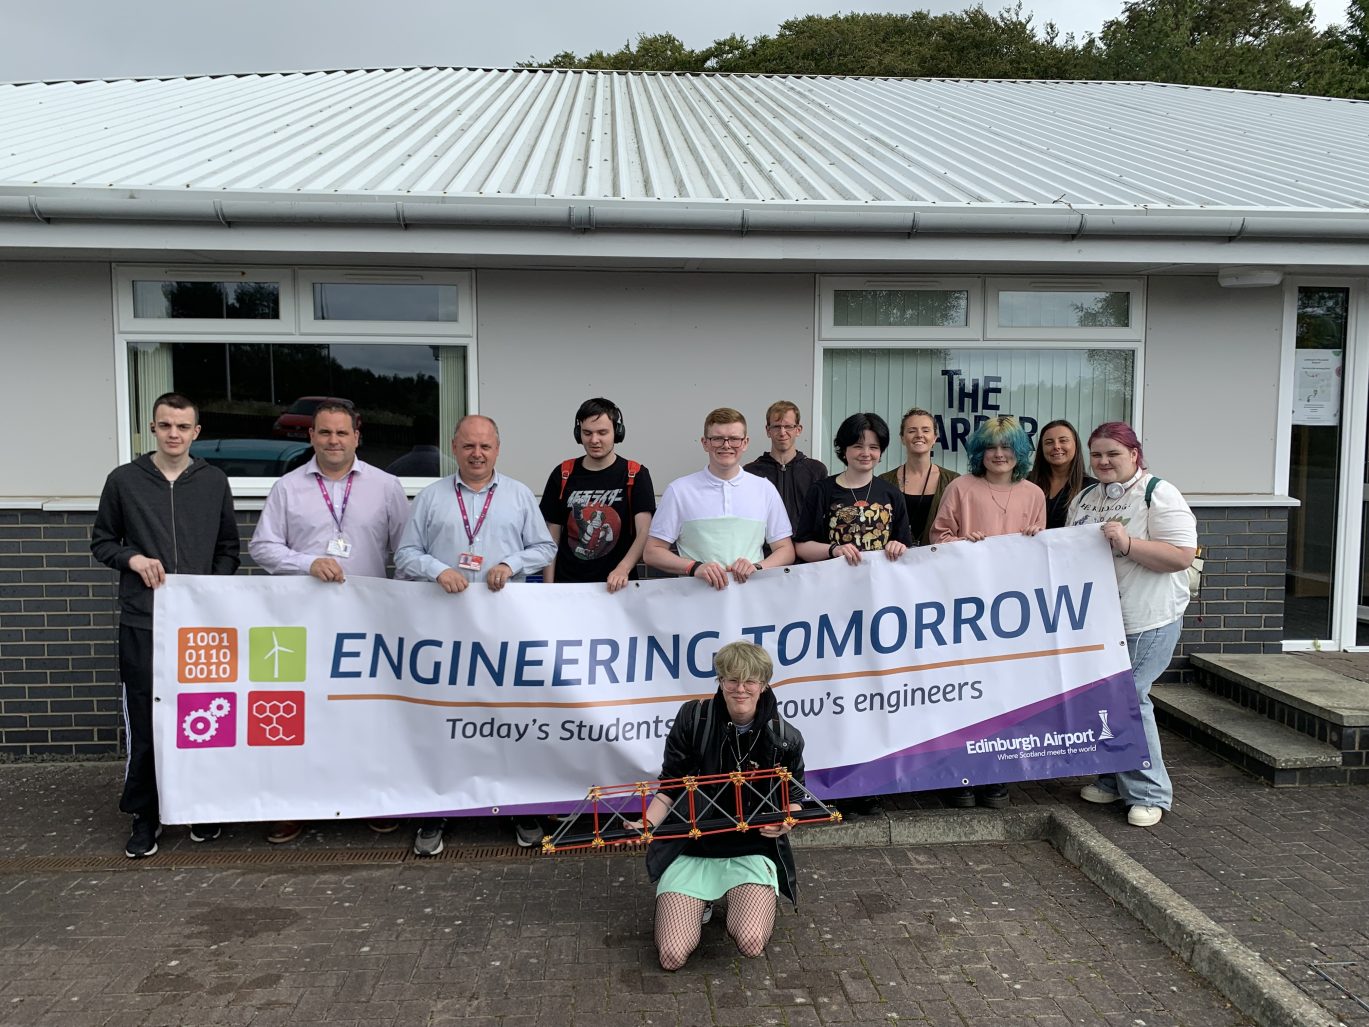 Group of young people holding banner saying Engineering Tomorrow